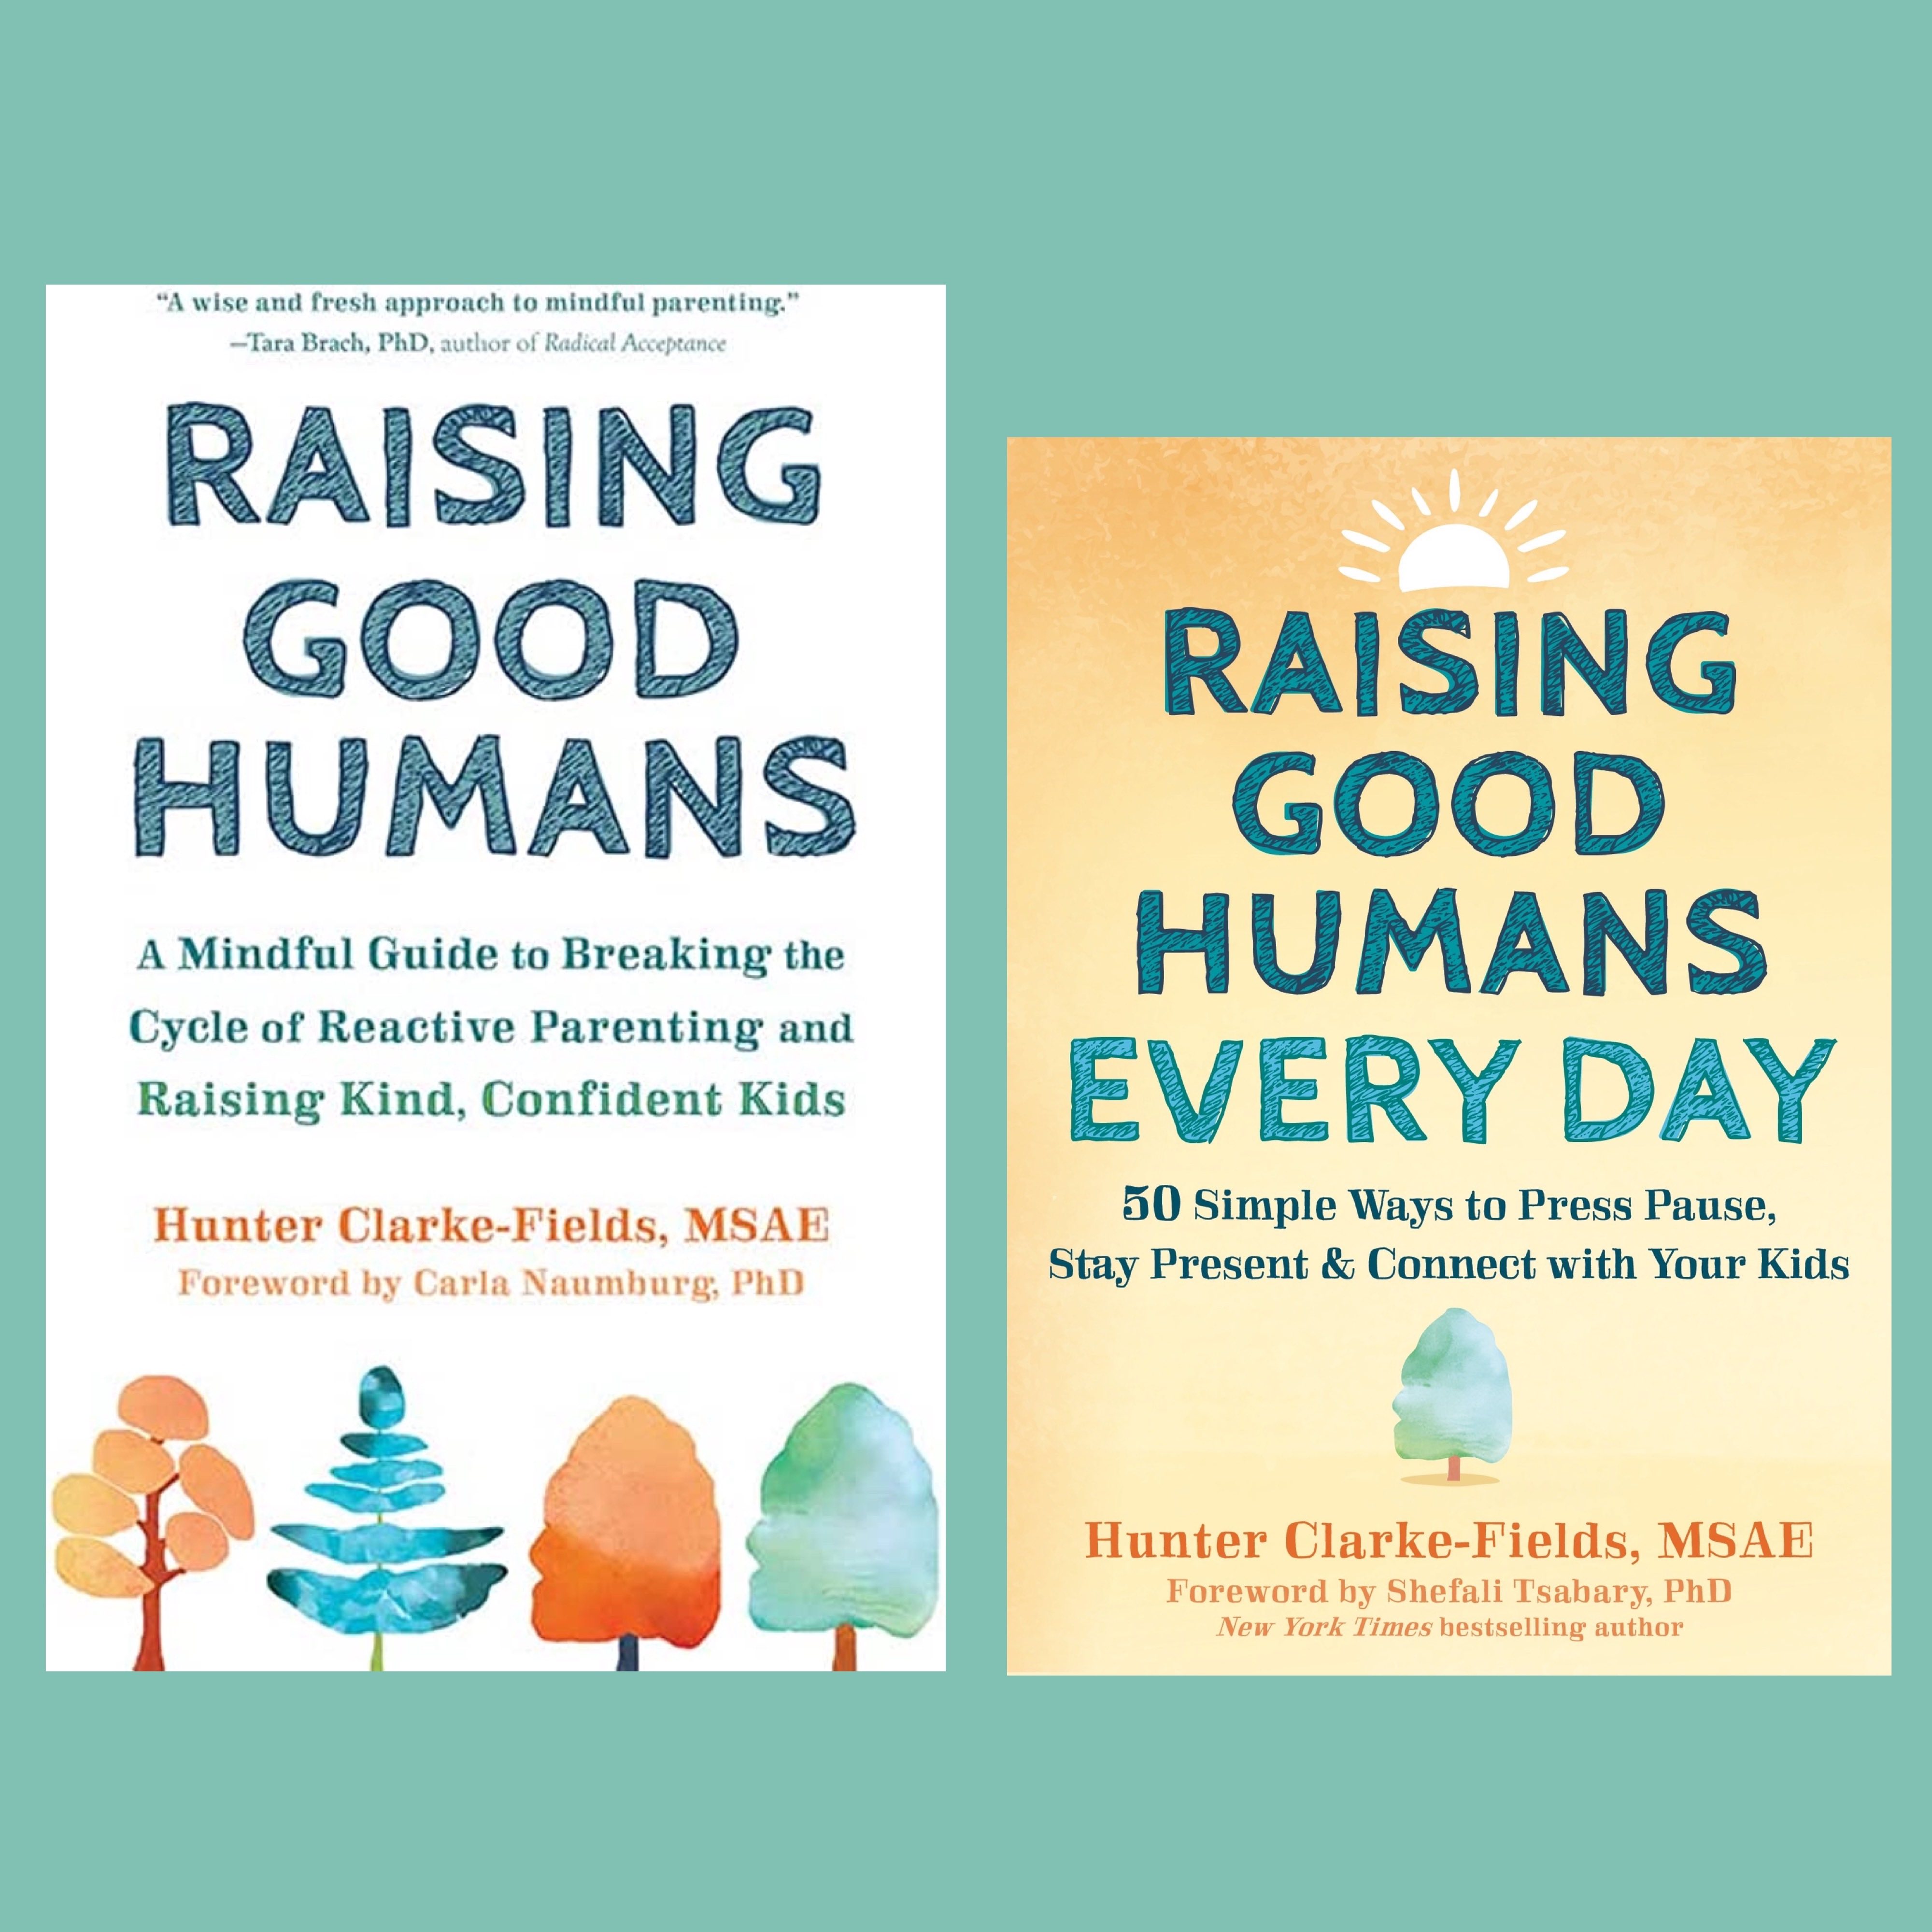 Hunter Clarke-Fields' first book “Raising Good Humans” was a mega bestseller that sold 200k+ copies and has 4,300+ Amazon reviews. The highly anticipated sequel is “Raising Good Humans Every Day”.